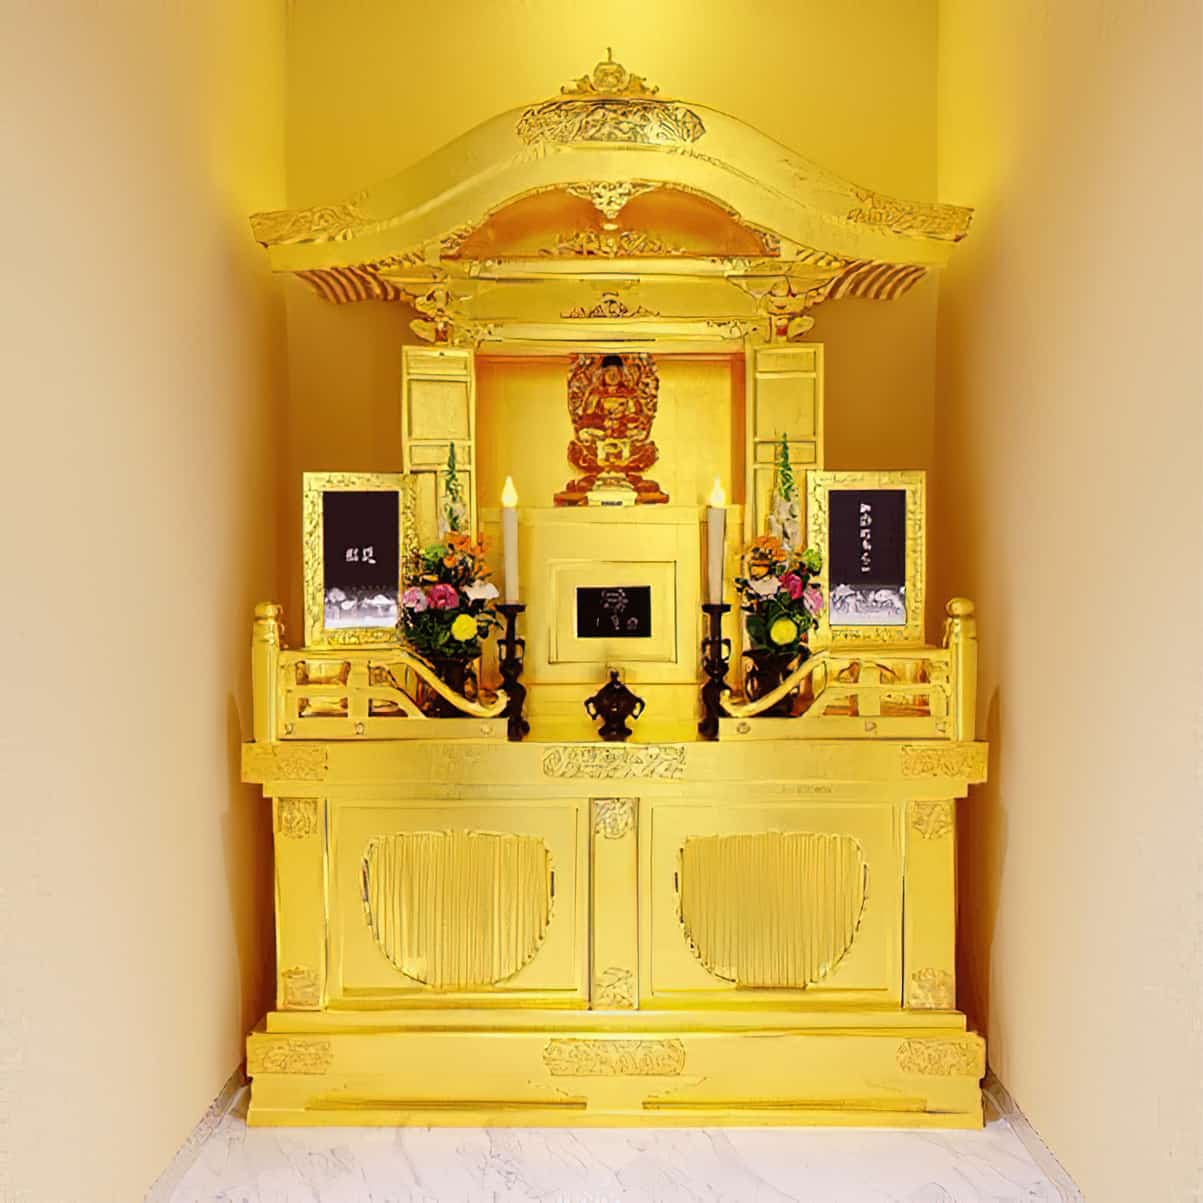 Upon scanning your IC card, your relative’s urn is automatically retrieved from a storage rack, and presented at this private worship room.